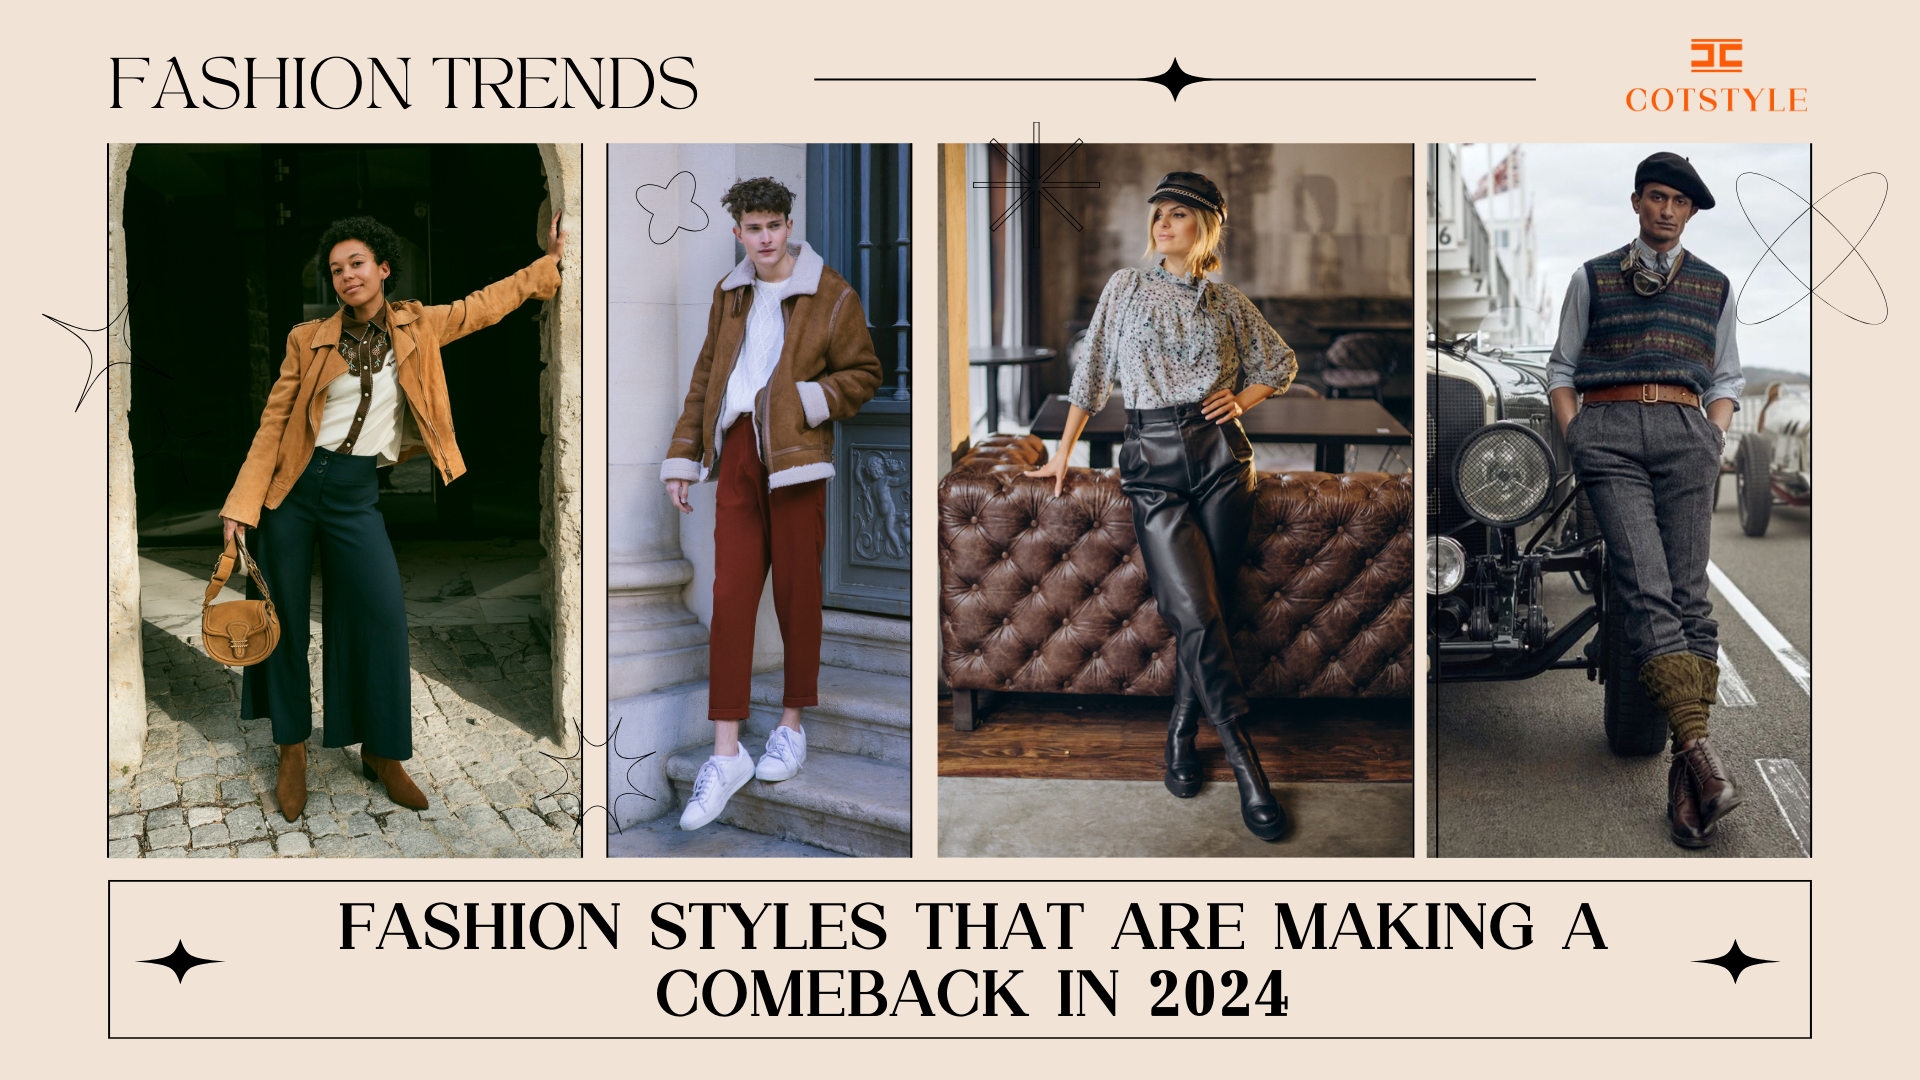 These '70s fashion trends are making a comeback